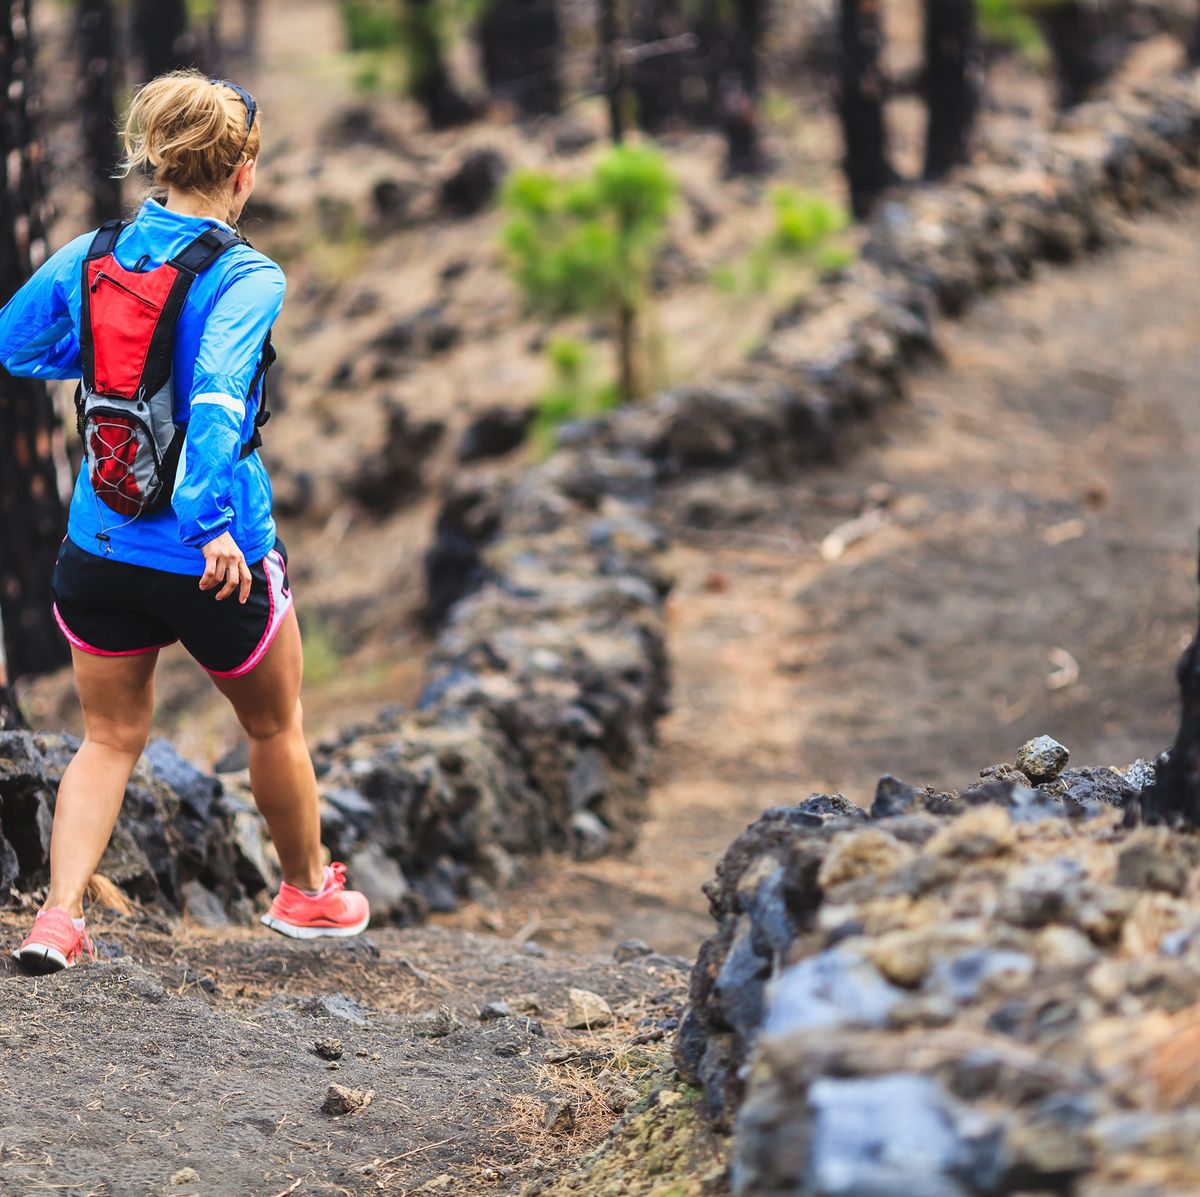 Are you running too hard? Perceived extertion guide for trail/ultras runners